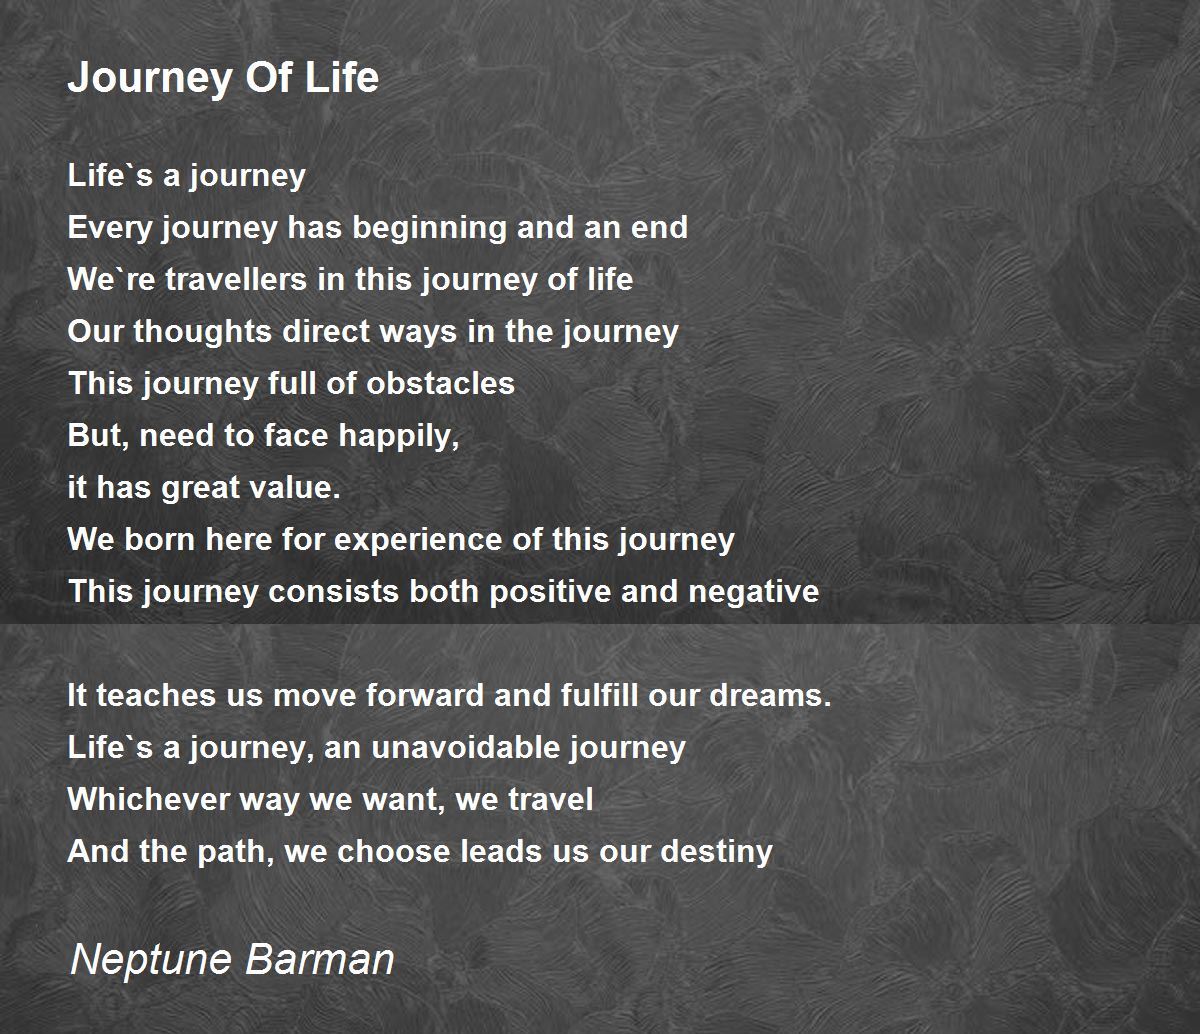 the journey of life poem